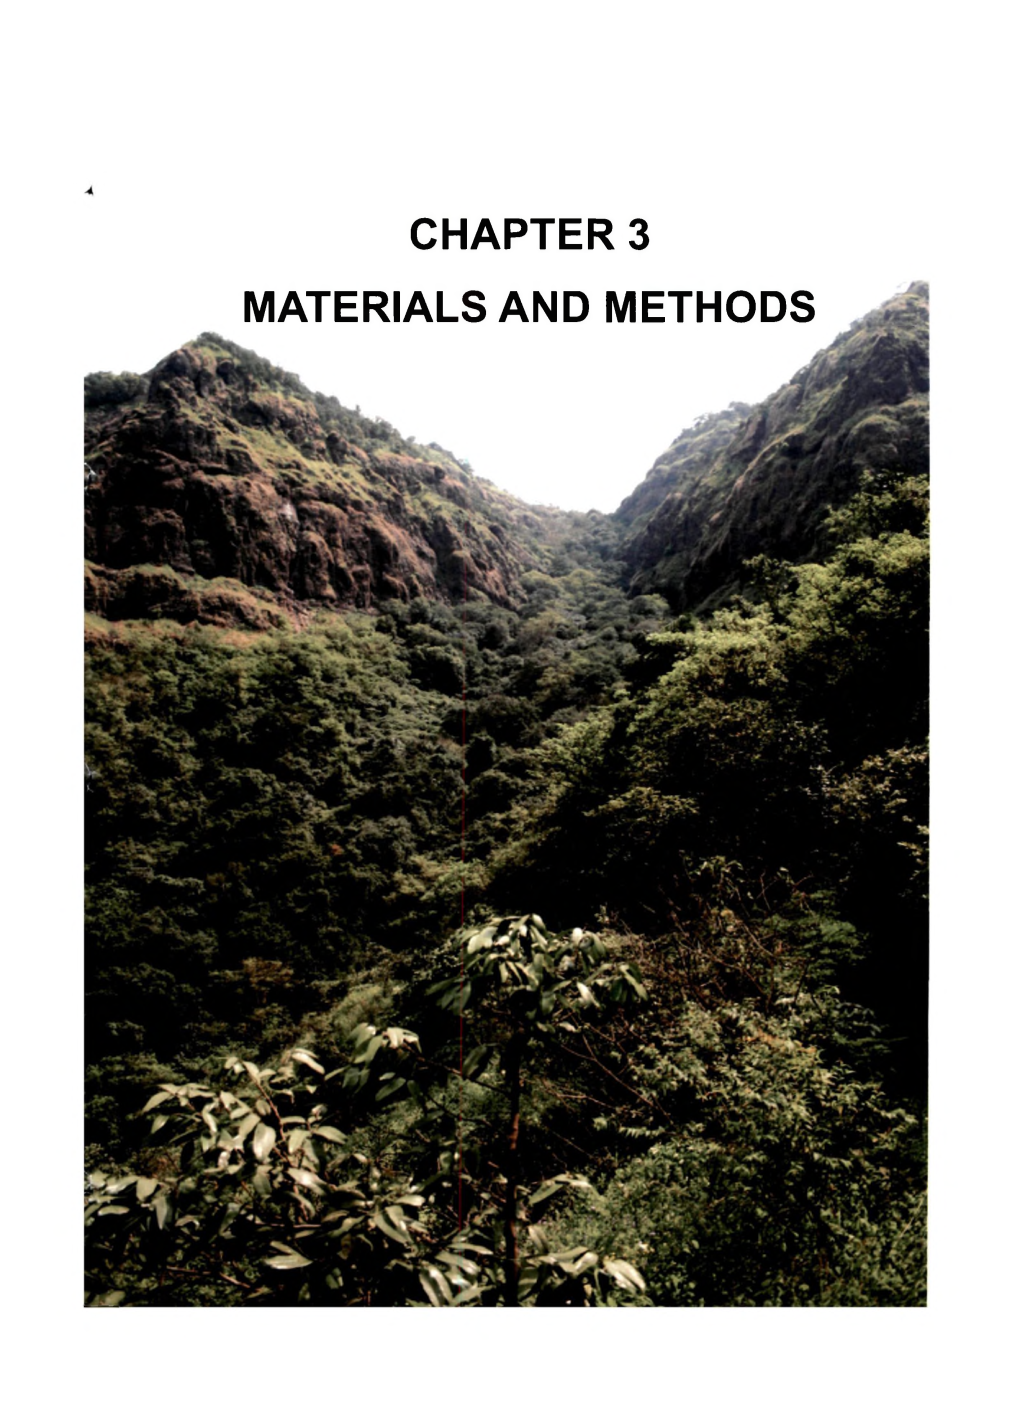 CHAPTER 3 MATERIALS and METHODS CHAPTER 3 Materials and Methods